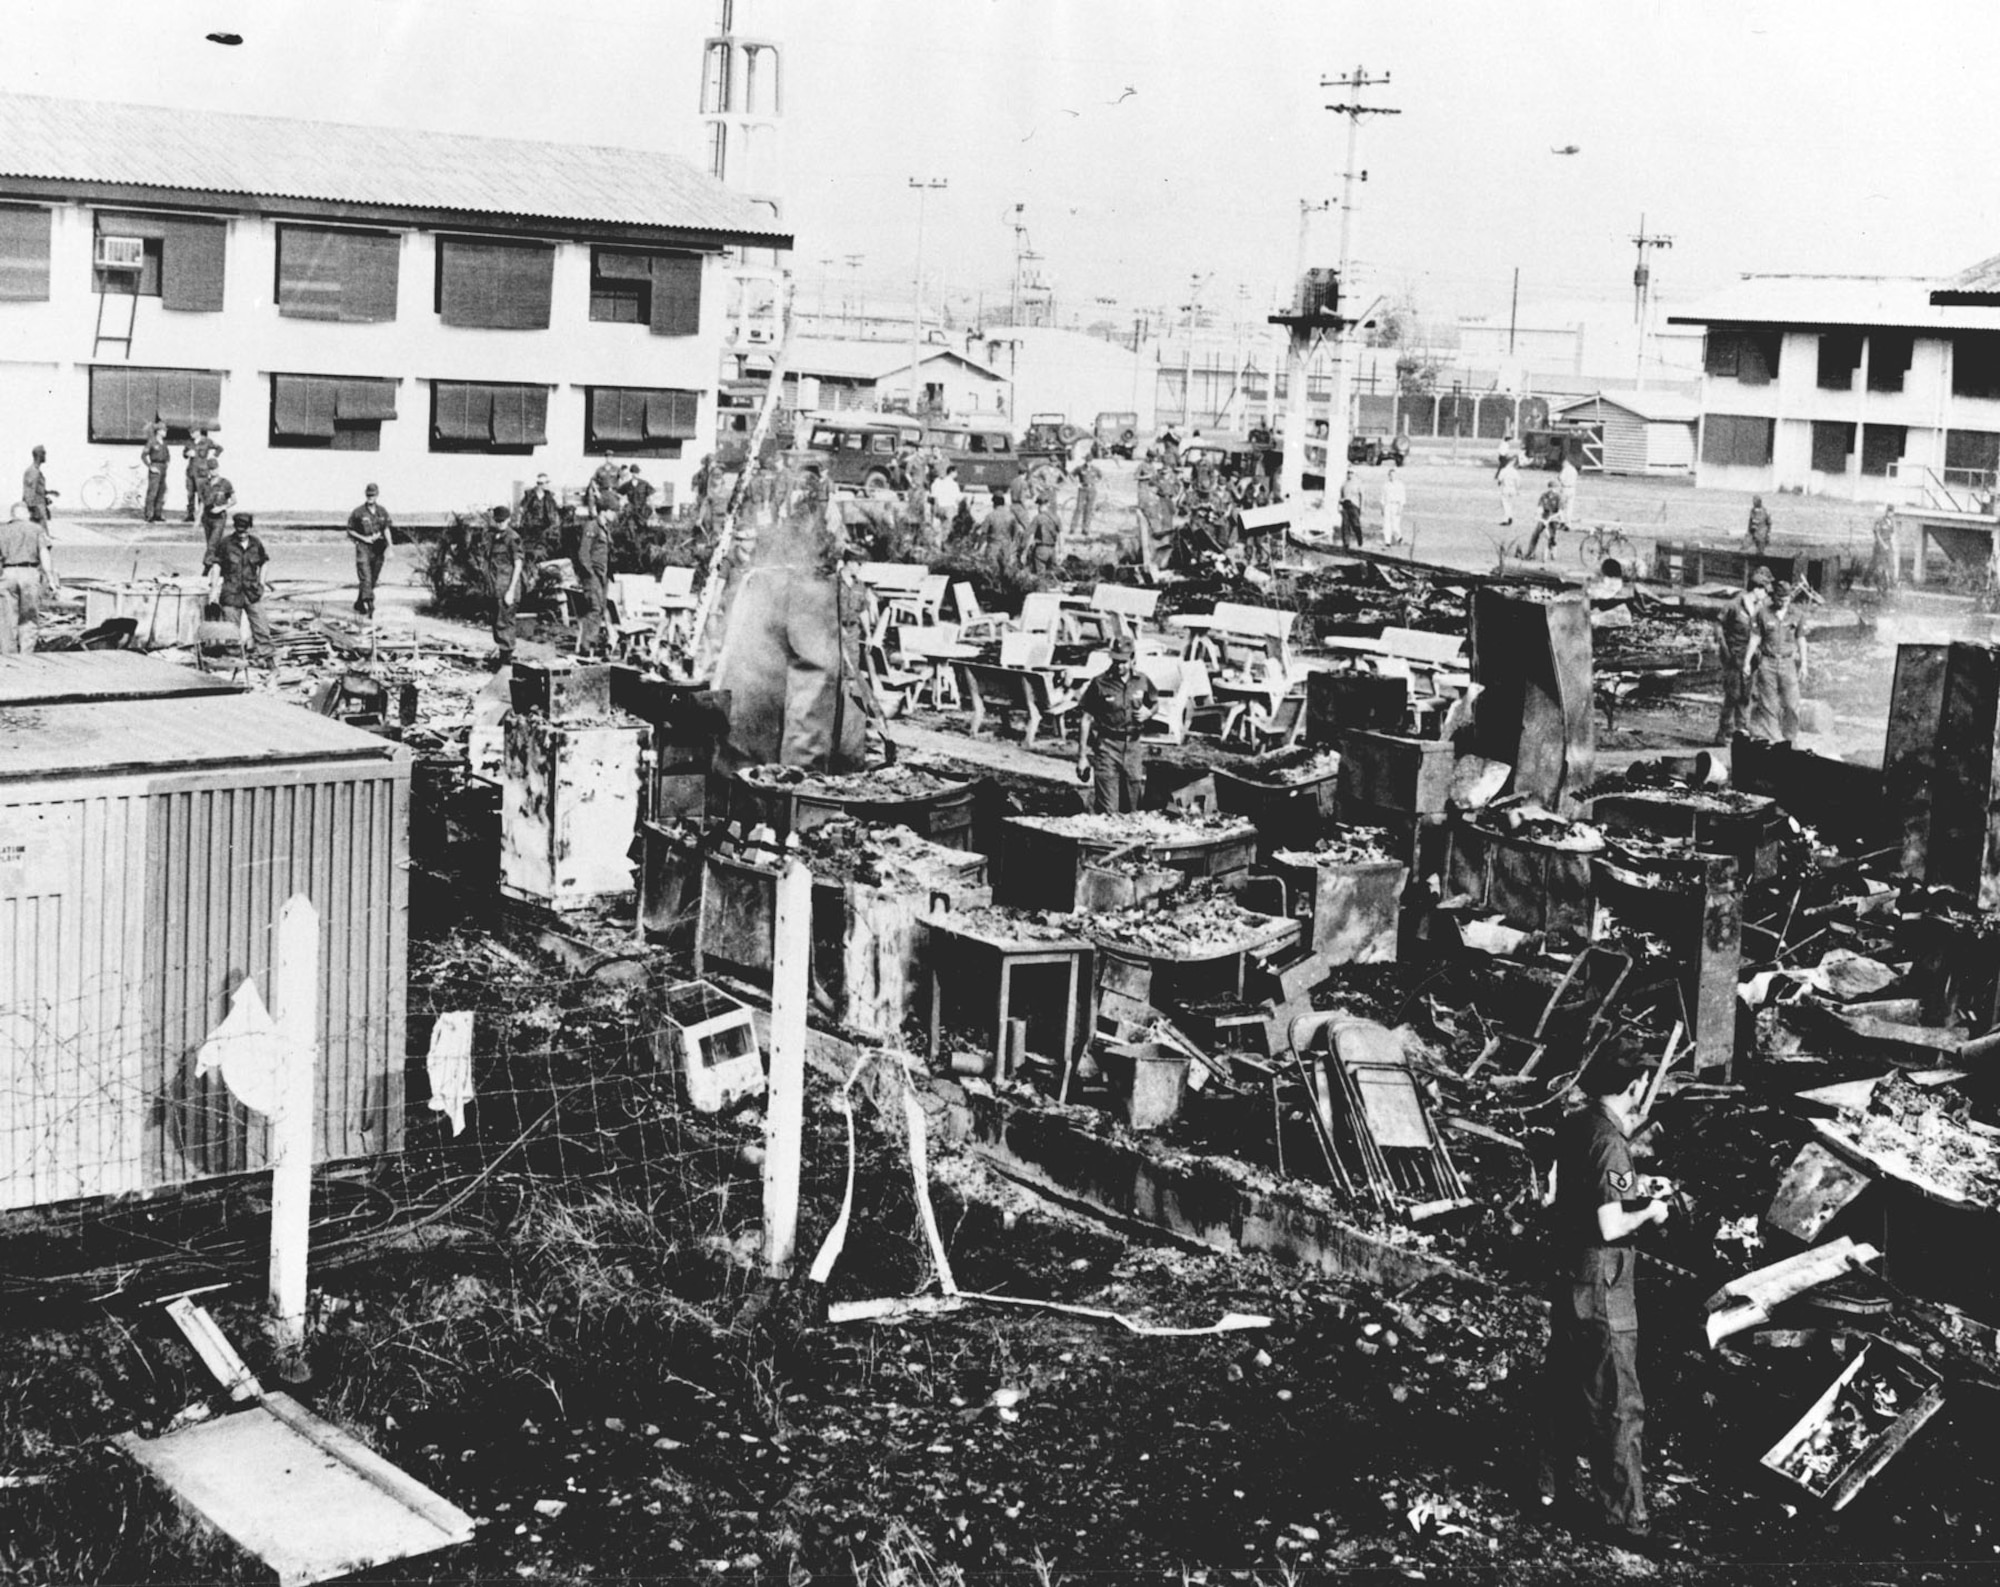 Communists destroyed buildings and aircraft at Tan Son Nhut Air Base. (U.S. Air Force photo)